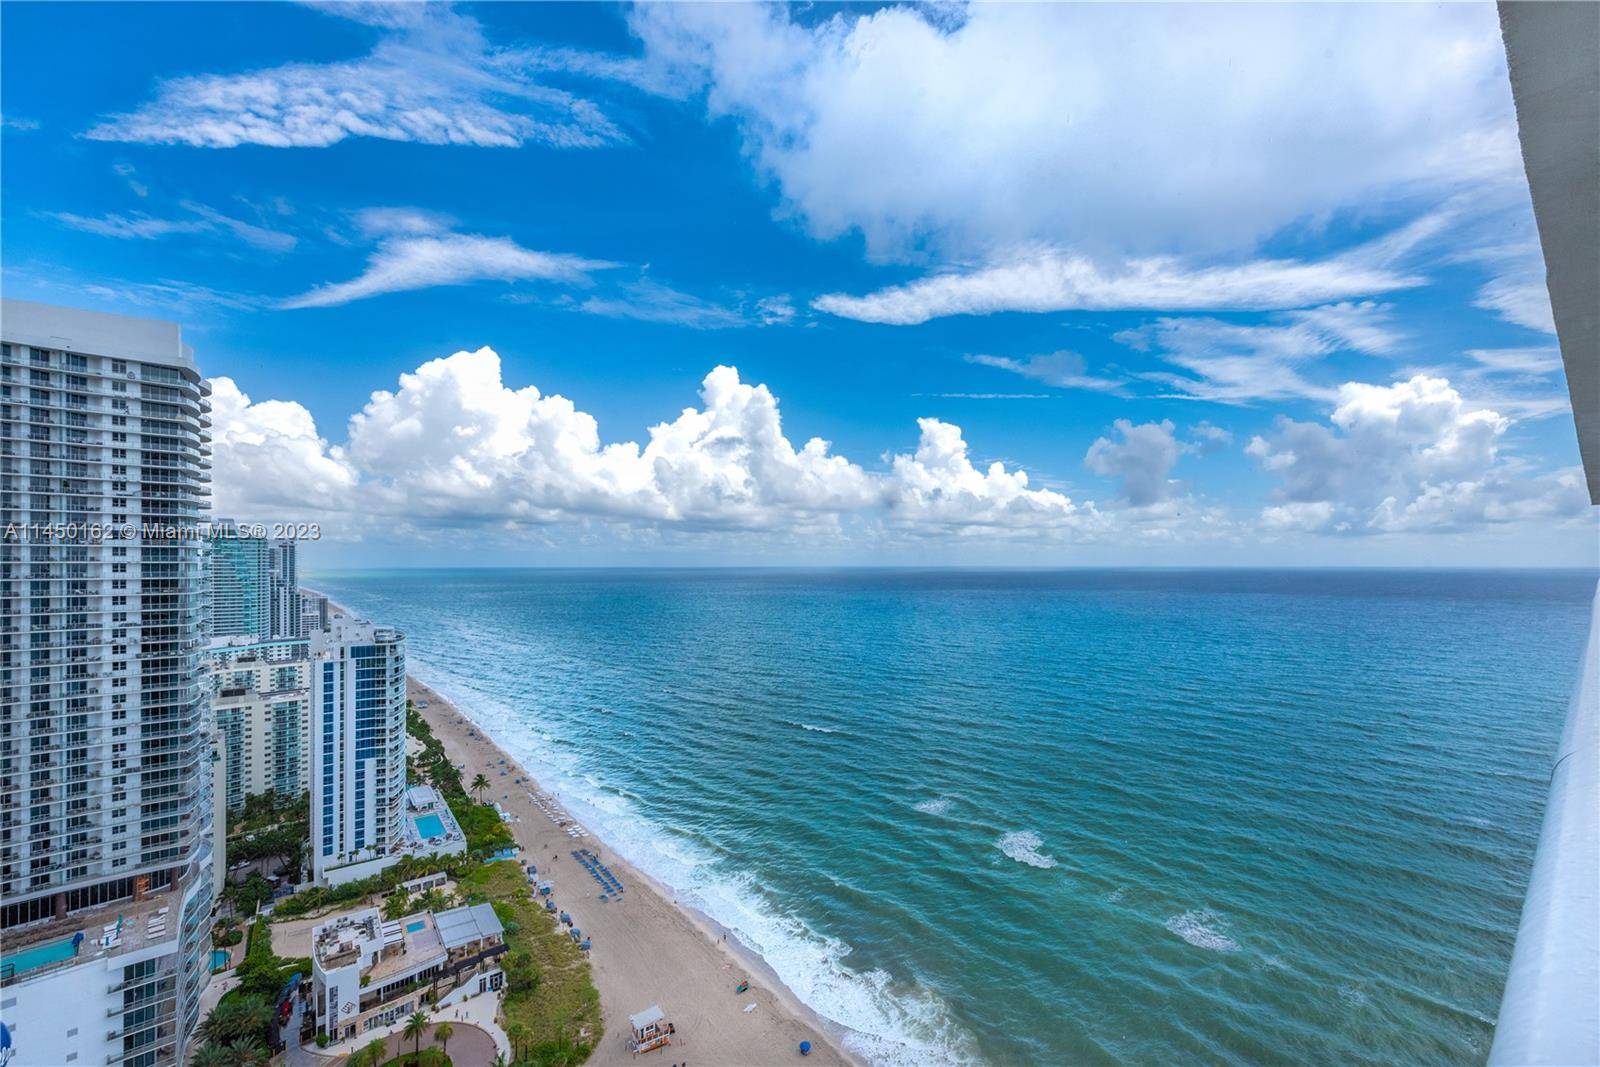 This stunning oceanfront property offers the ultimate in coastal living, featuring breathtaking views of the Atlantic Ocean and top of the line amenities that define the South Florida lifestyle.